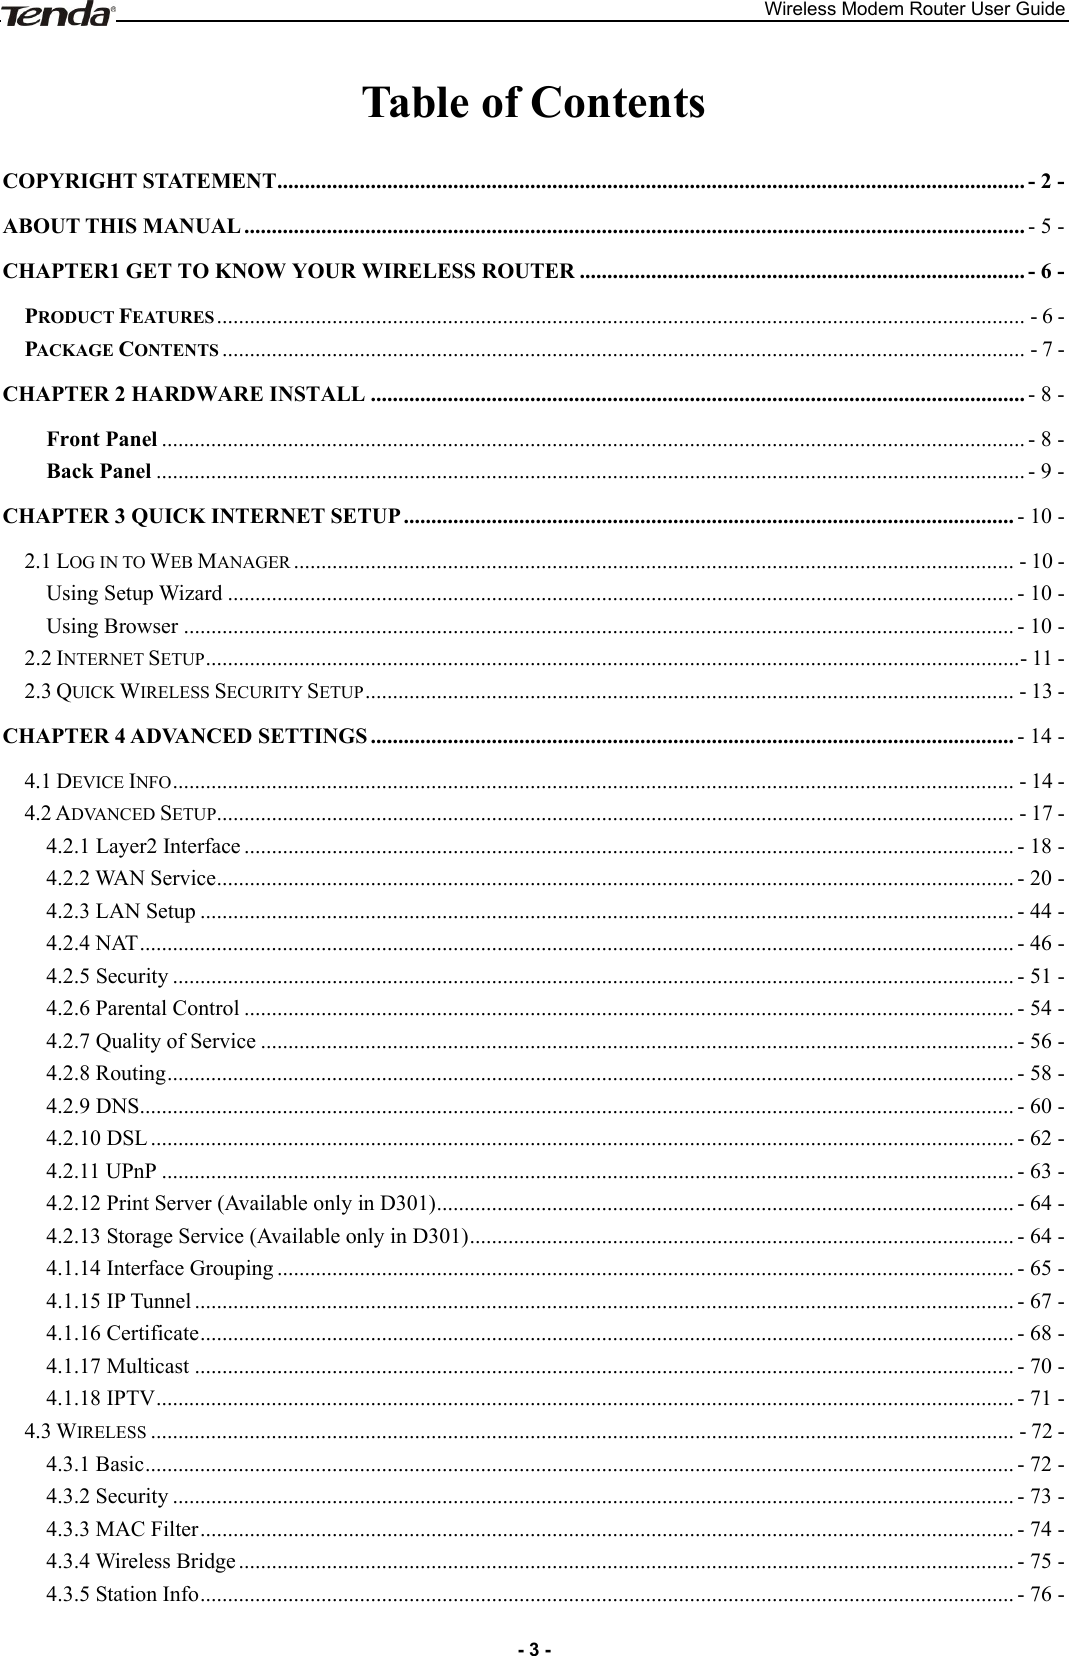 Wireless Modem Router User Guide - 3 - Table of Contents COPYRIGHT STATEMENT ........................................................................................................................................ - 2 - ABOUT THIS MANUAL .............................................................................................................................................. - 5 - CHAPTER1 GET TO KNOW YOUR WIRELESS ROUTER ................................................................................. - 6 - PRODUCT FEATURES ................................................................................................................................................... - 6 - PACKAGE CONTENTS .................................................................................................................................................. - 7 - CHAPTER 2 HARDWARE INSTALL ....................................................................................................................... - 8 - Front Panel ............................................................................................................................................................. - 8 - Back Panel .............................................................................................................................................................. - 9 - CHAPTER 3 QUICK INTERNET SETUP ............................................................................................................... - 10 - 2.1 LOG IN TO WEB MANAGER ................................................................................................................................... - 10 - Using Setup Wizard ............................................................................................................................................... - 10 - Using Browser ....................................................................................................................................................... - 10 - 2.2 INTERNET SETUP .................................................................................................................................................... - 11 - 2.3 QUICK WIRELESS SECURITY SETUP ...................................................................................................................... - 13 - CHAPTER 4 ADVANCED SETTINGS ..................................................................................................................... - 14 - 4.1 DEVICE INFO ......................................................................................................................................................... - 14 - 4.2 ADVANCED SETUP ................................................................................................................................................. - 17 - 4.2.1 Layer2 Interface ............................................................................................................................................ - 18 - 4.2.2 WAN Service ................................................................................................................................................. - 20 - 4.2.3 LAN Setup .................................................................................................................................................... - 44 - 4.2.4 NAT ............................................................................................................................................................... - 46 - 4.2.5 Security ......................................................................................................................................................... - 51 - 4.2.6 Parental Control ............................................................................................................................................ - 54 - 4.2.7 Quality of Service ......................................................................................................................................... - 56 - 4.2.8 Routing .......................................................................................................................................................... - 58 - 4.2.9 DNS ............................................................................................................................................................... - 60 - 4.2.10 DSL ............................................................................................................................................................. - 62 - 4.2.11 UPnP ........................................................................................................................................................... - 63 - 4.2.12 Print Server (Available only in D301) ......................................................................................................... - 64 - 4.2.13 Storage Service (Available only in D301) ................................................................................................... - 64 - 4.1.14 Interface Grouping ...................................................................................................................................... - 65 - 4.1.15 IP Tunnel ..................................................................................................................................................... - 67 - 4.1.16 Certificate .................................................................................................................................................... - 68 - 4.1.17 Multicast ..................................................................................................................................................... - 70 - 4.1.18 IPTV ............................................................................................................................................................ - 71 - 4.3 WIRELESS ............................................................................................................................................................. - 72 - 4.3.1 Basic .............................................................................................................................................................. - 72 - 4.3.2 Security ......................................................................................................................................................... - 73 - 4.3.3 MAC Filter .................................................................................................................................................... - 74 - 4.3.4 Wireless Bridge ............................................................................................................................................. - 75 - 4.3.5 Station Info .................................................................................................................................................... - 76 - 